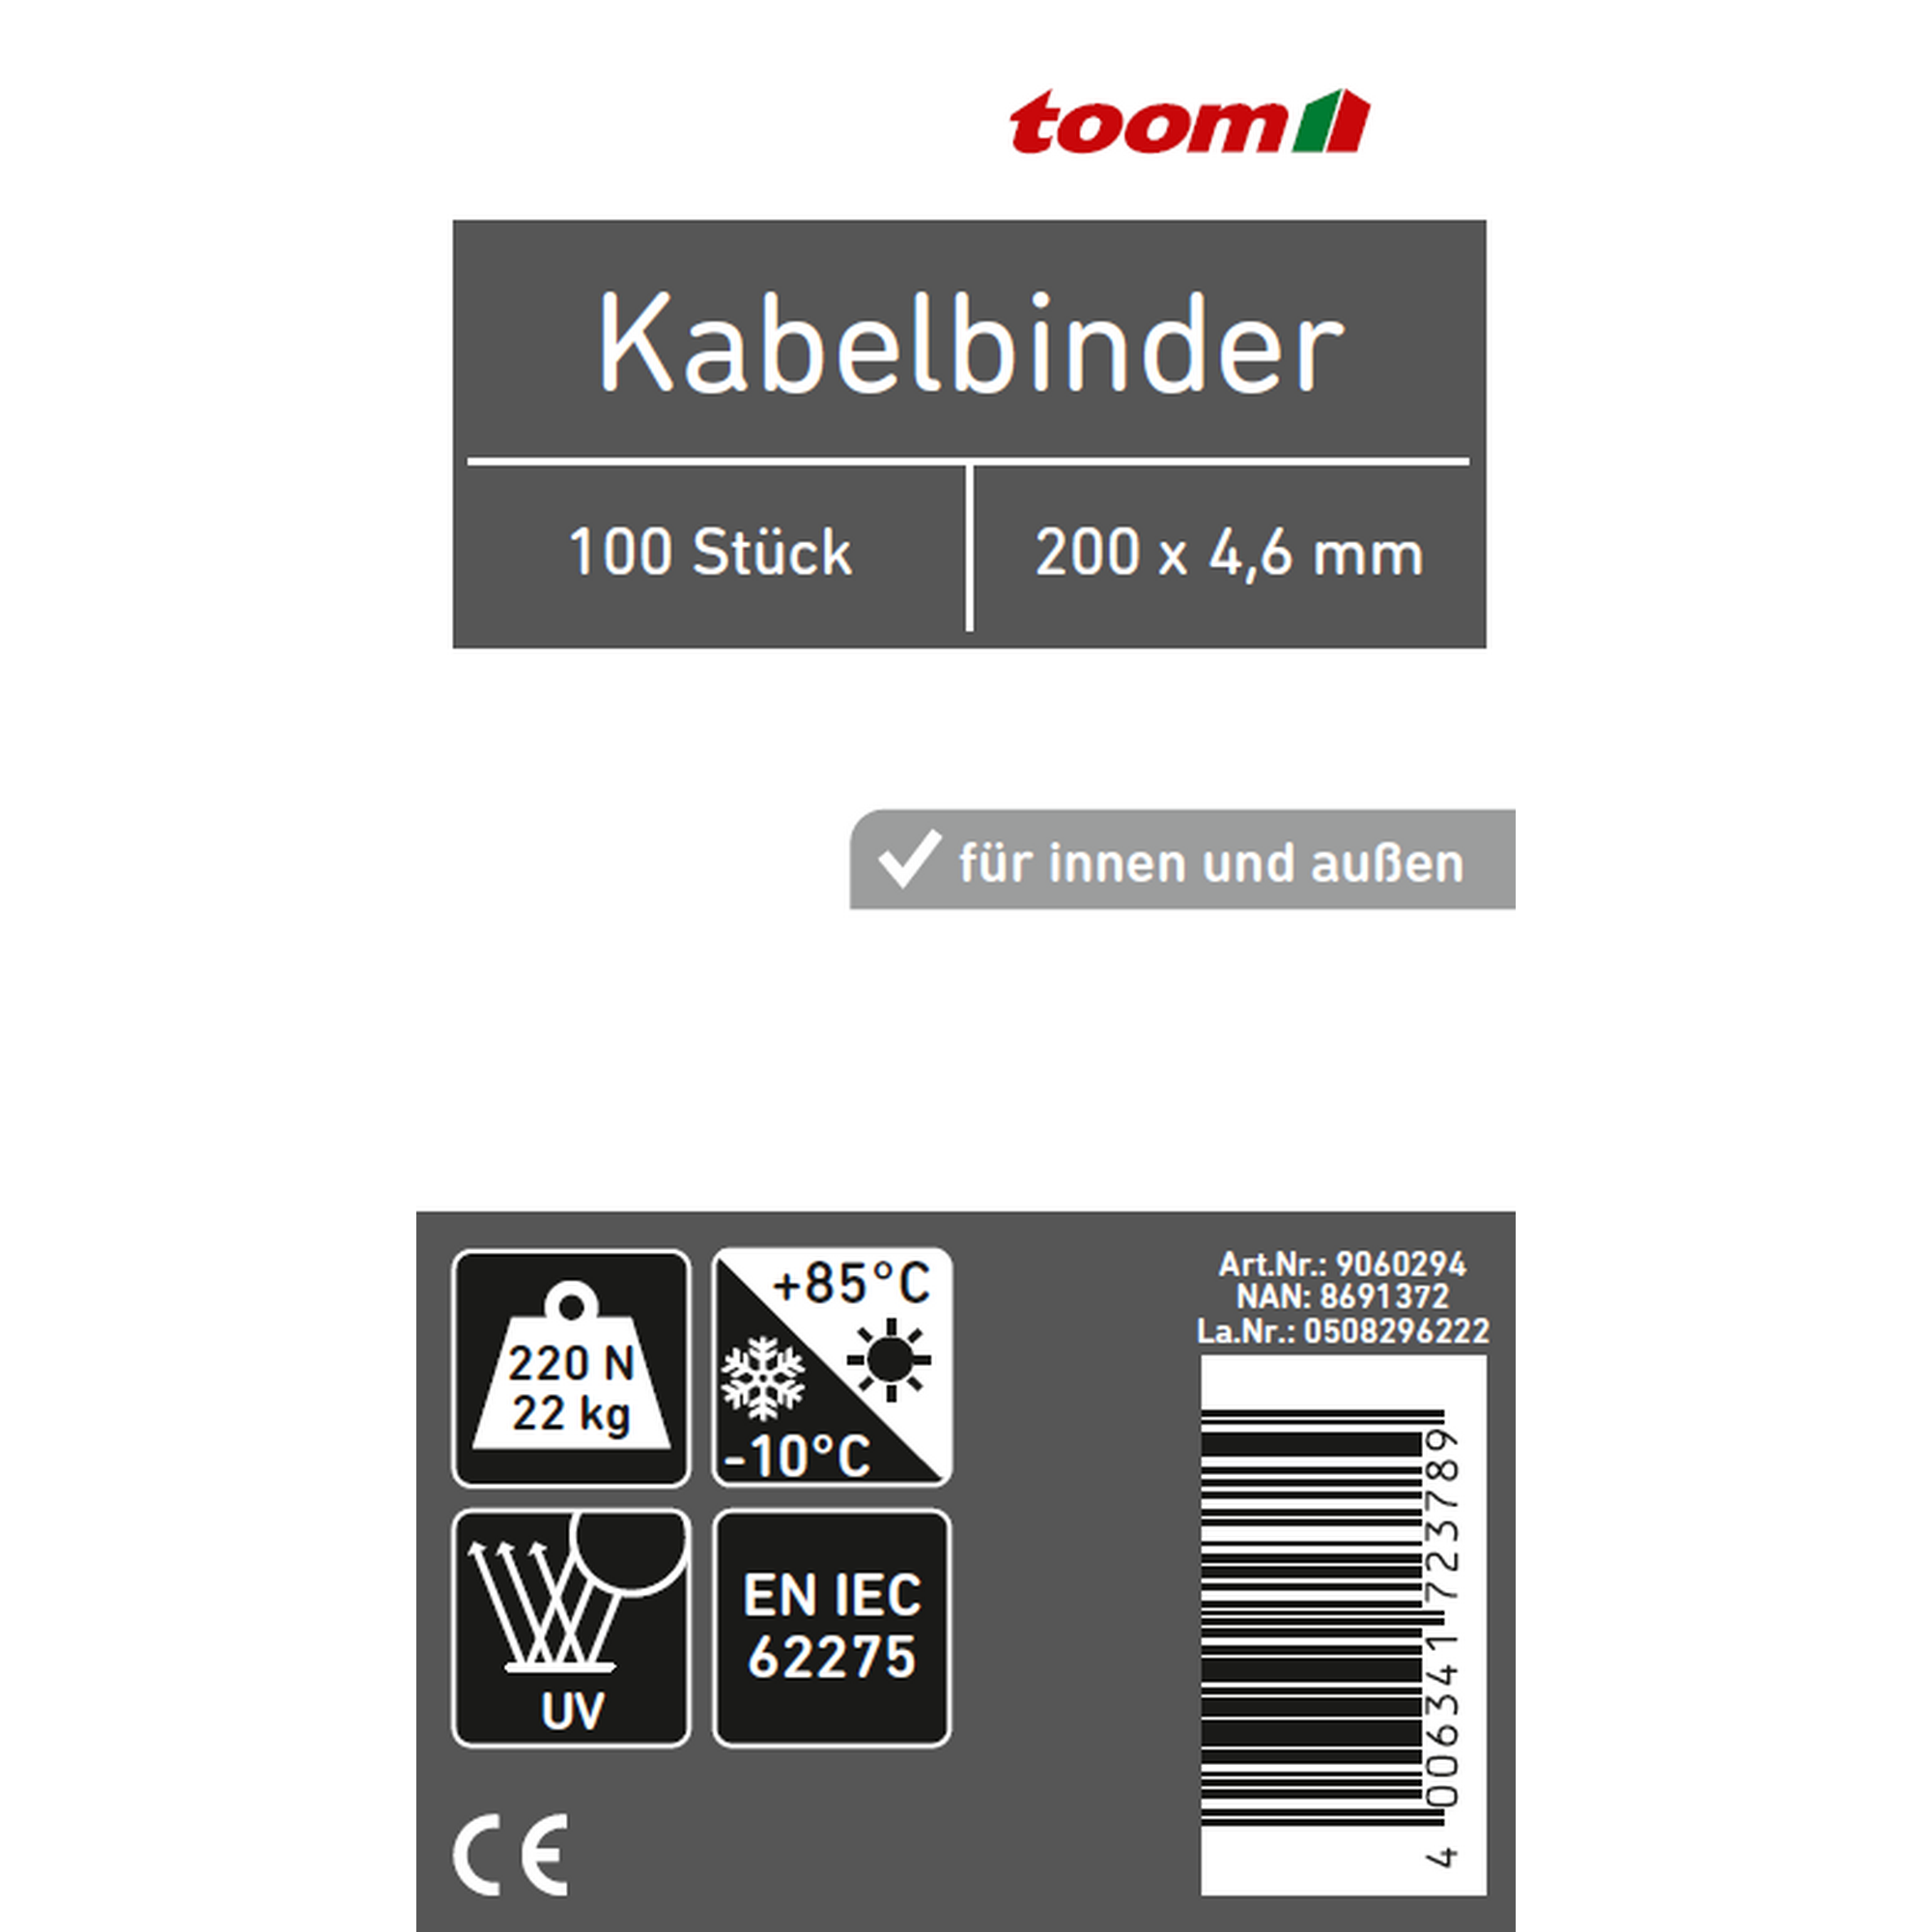 Kabelbinder weiß 4,6 x 200 mm 100 Stück + product picture